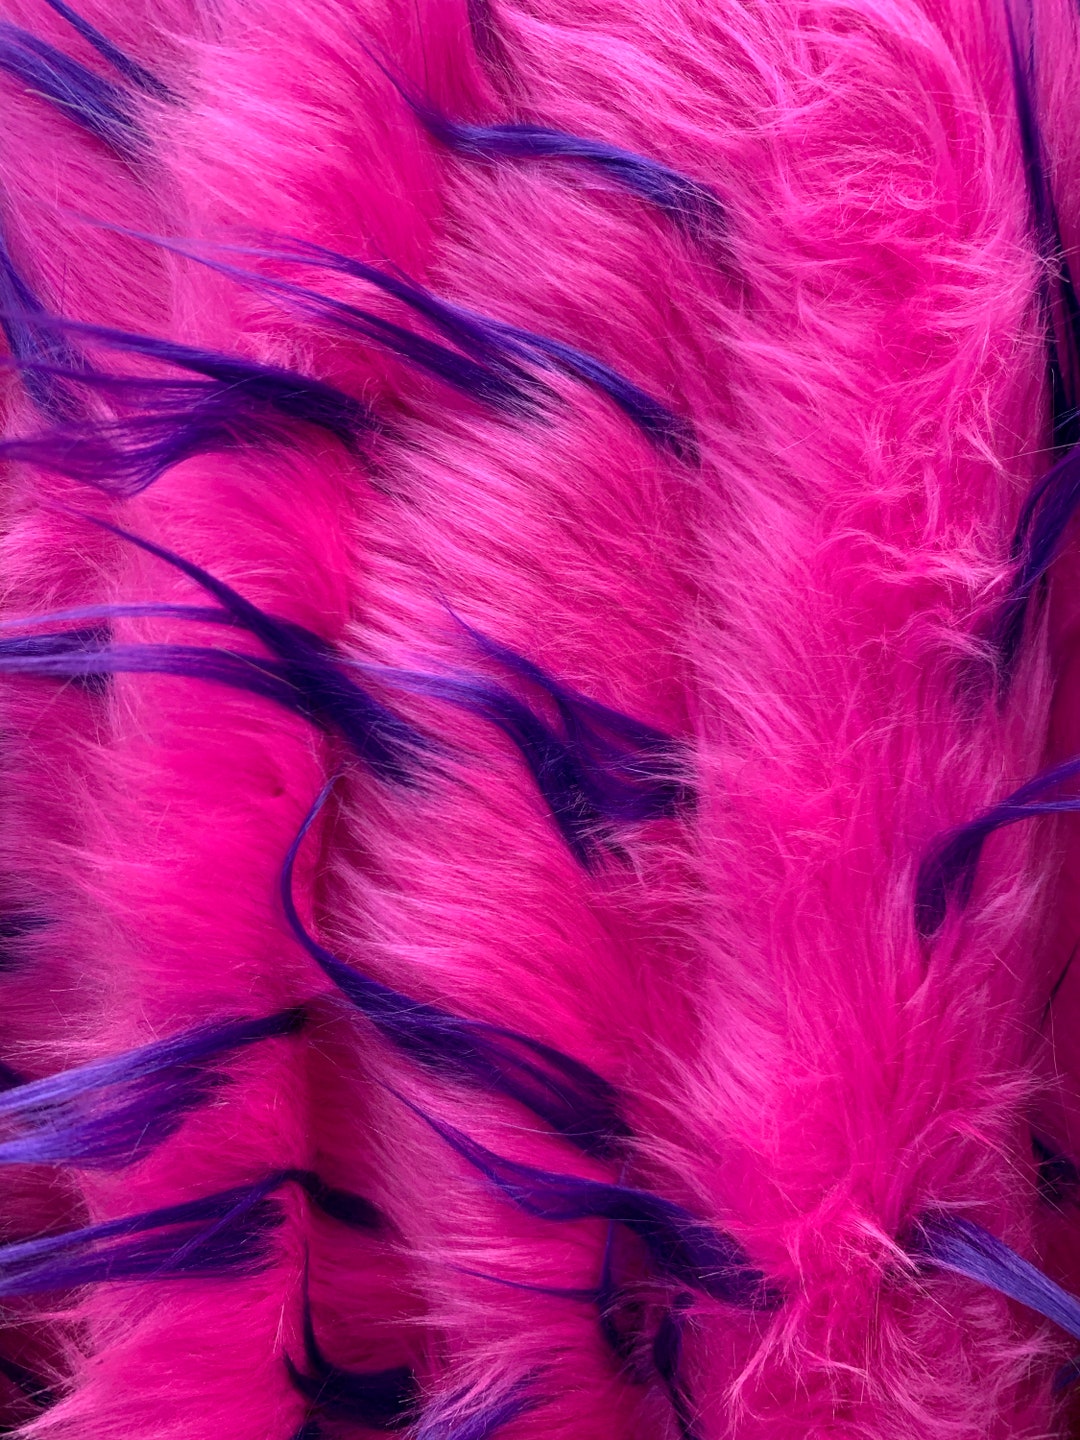 Polly HOT PINK PURPLE Spike Shaggy Soft Faux Fur Fabric for - Etsy